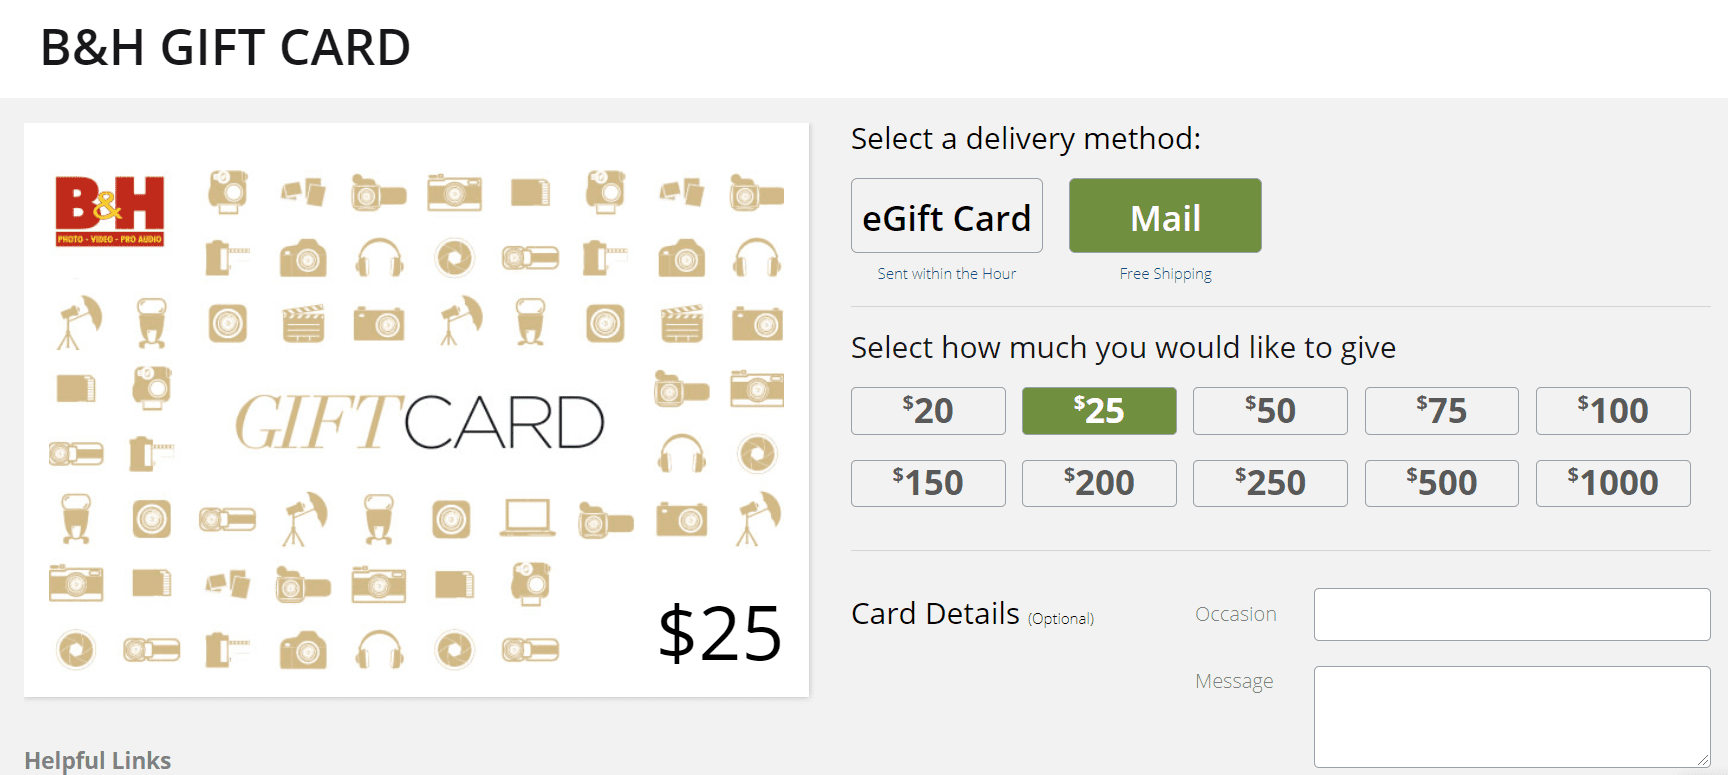 B&H Photo Video has gift cards